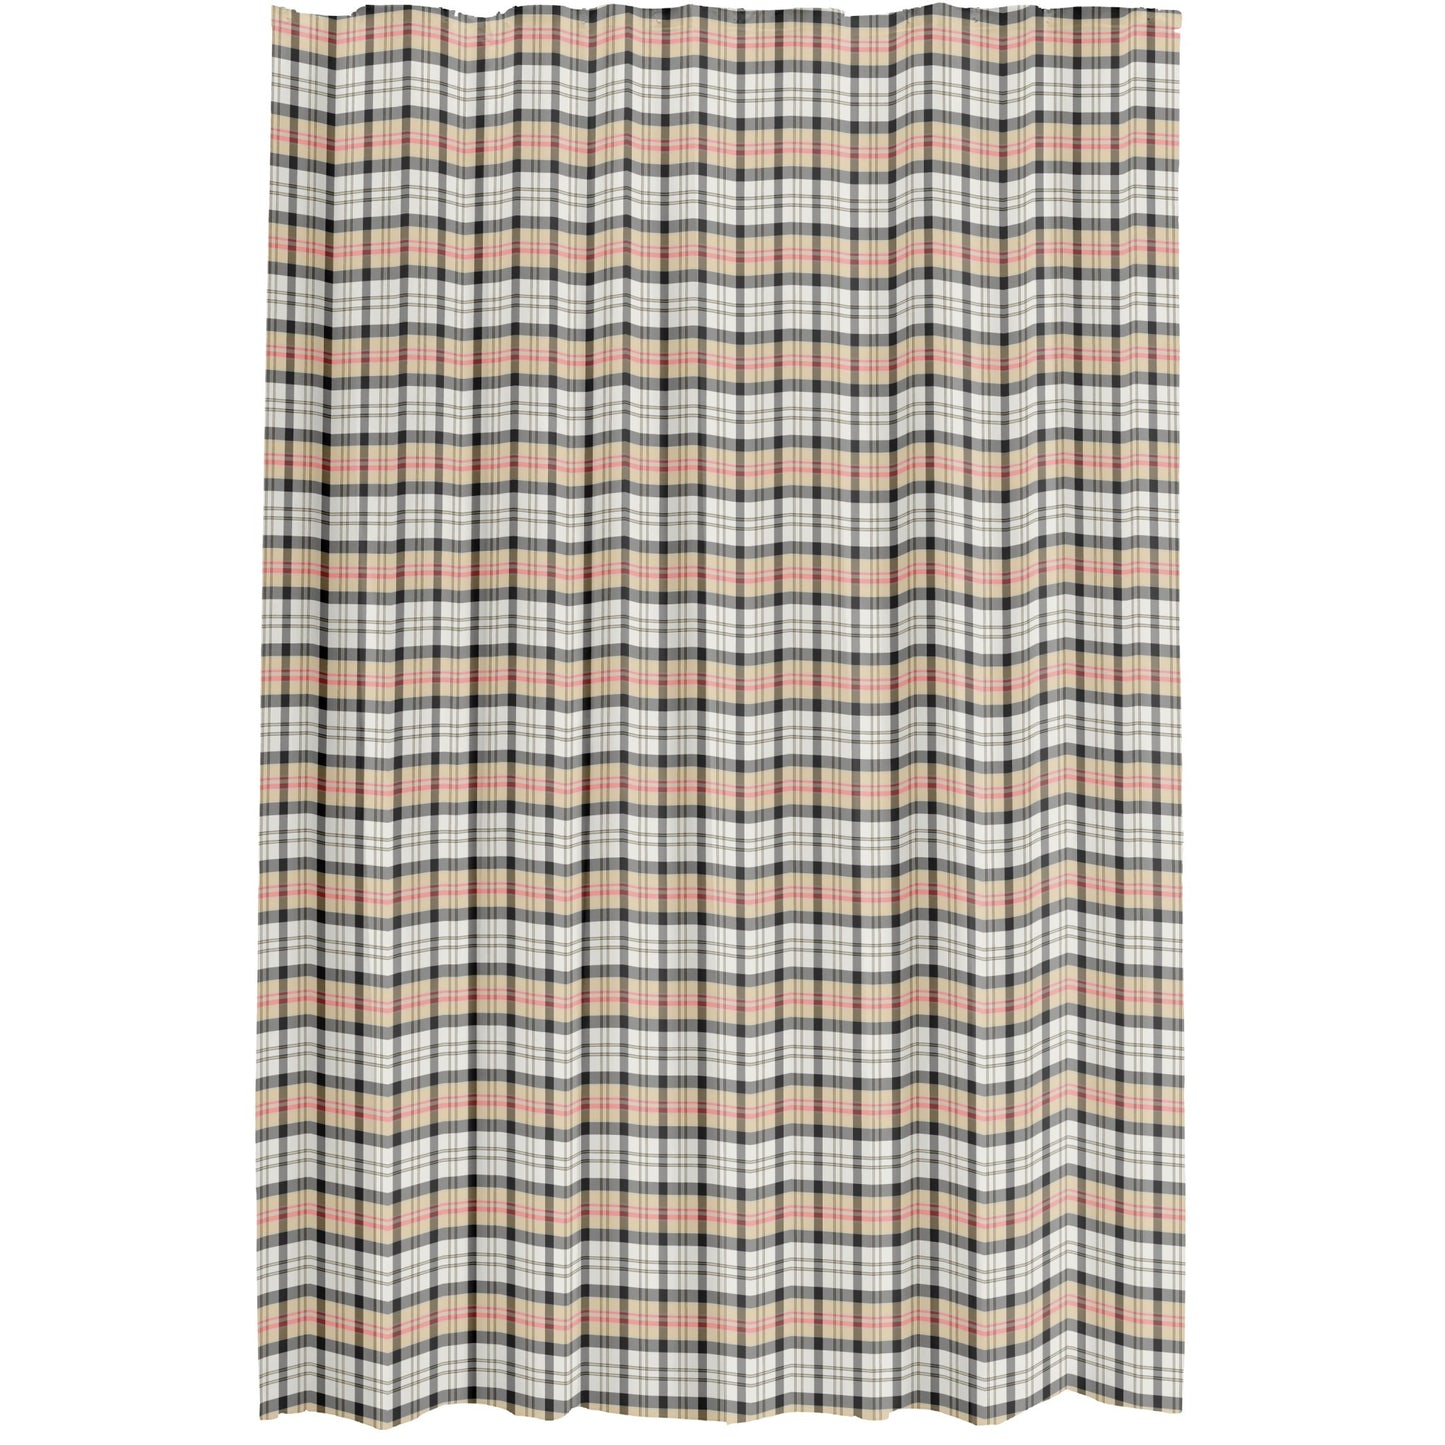 Silver and Gold Plaid Shower Curtain- shades and stripes of yellow, gold, cream, red, and black